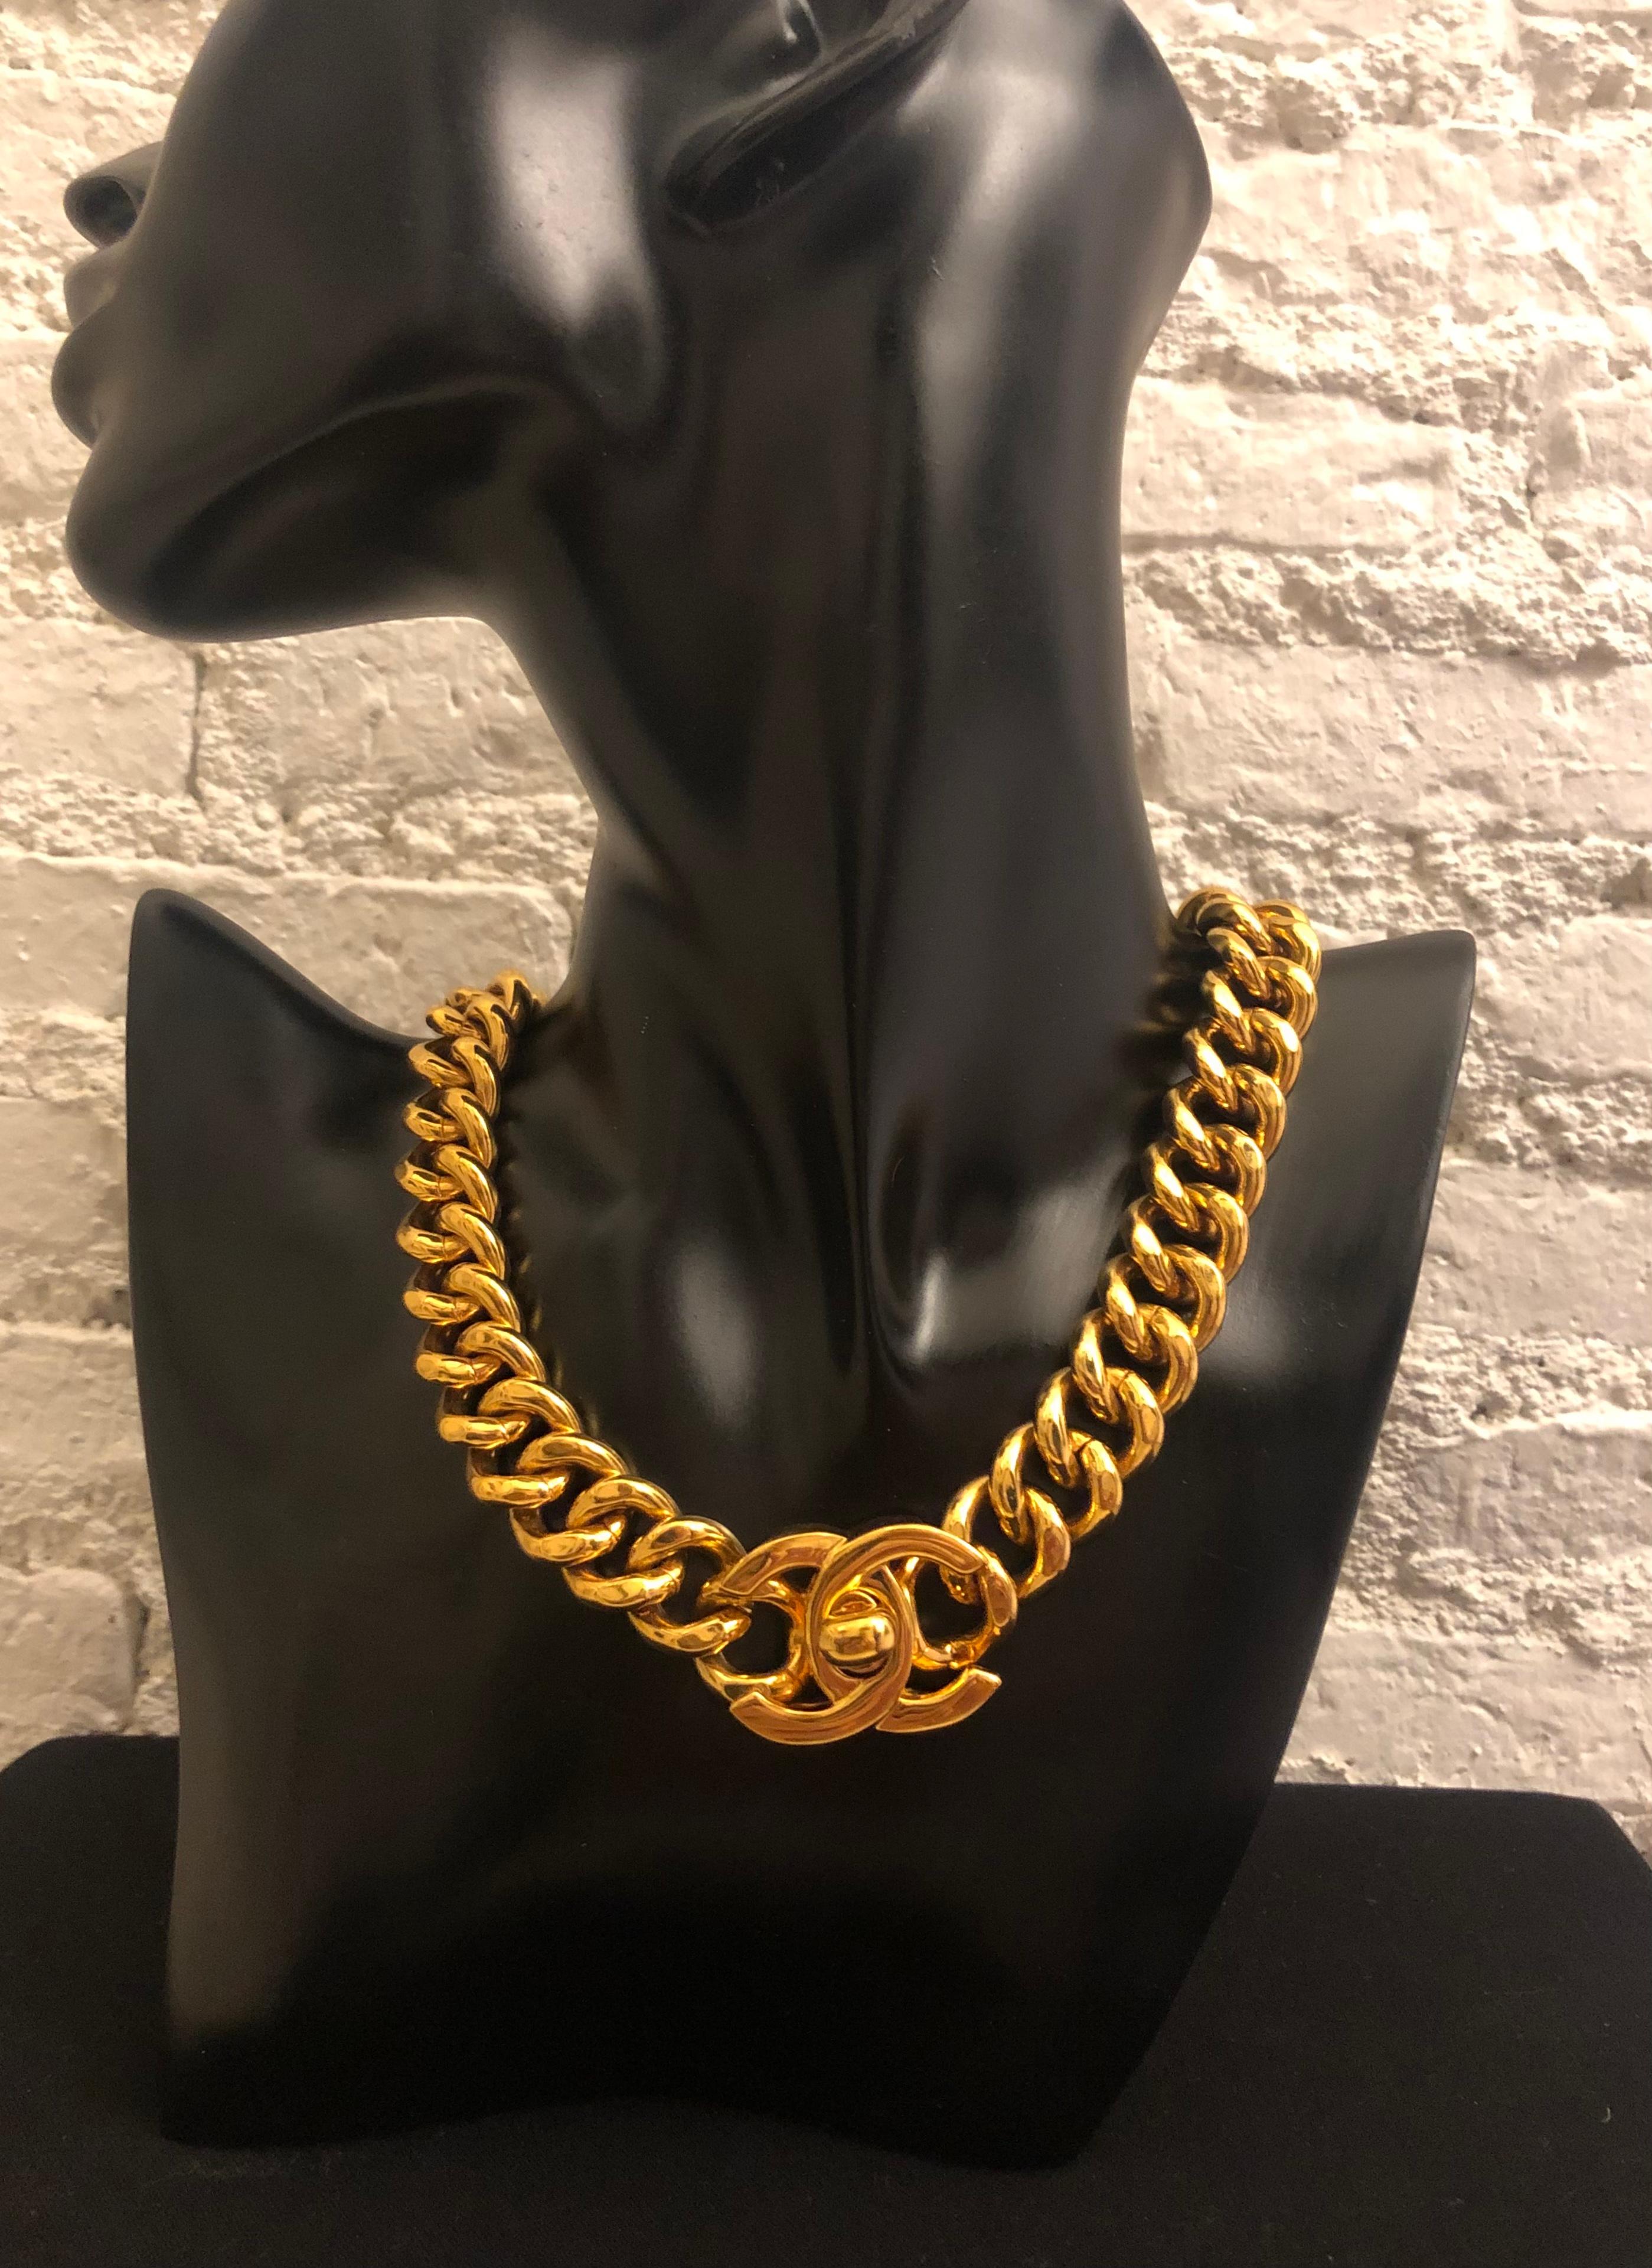 Vintage CHANEL gold toned chain necklace featuring the iconic Chanel turnlock closure in sturdy gold toned chain. Chanel’s iconic turn-lock on flap bags was reinvented by Karl Lagerfeld as a statement element on some of these vintage accessories.